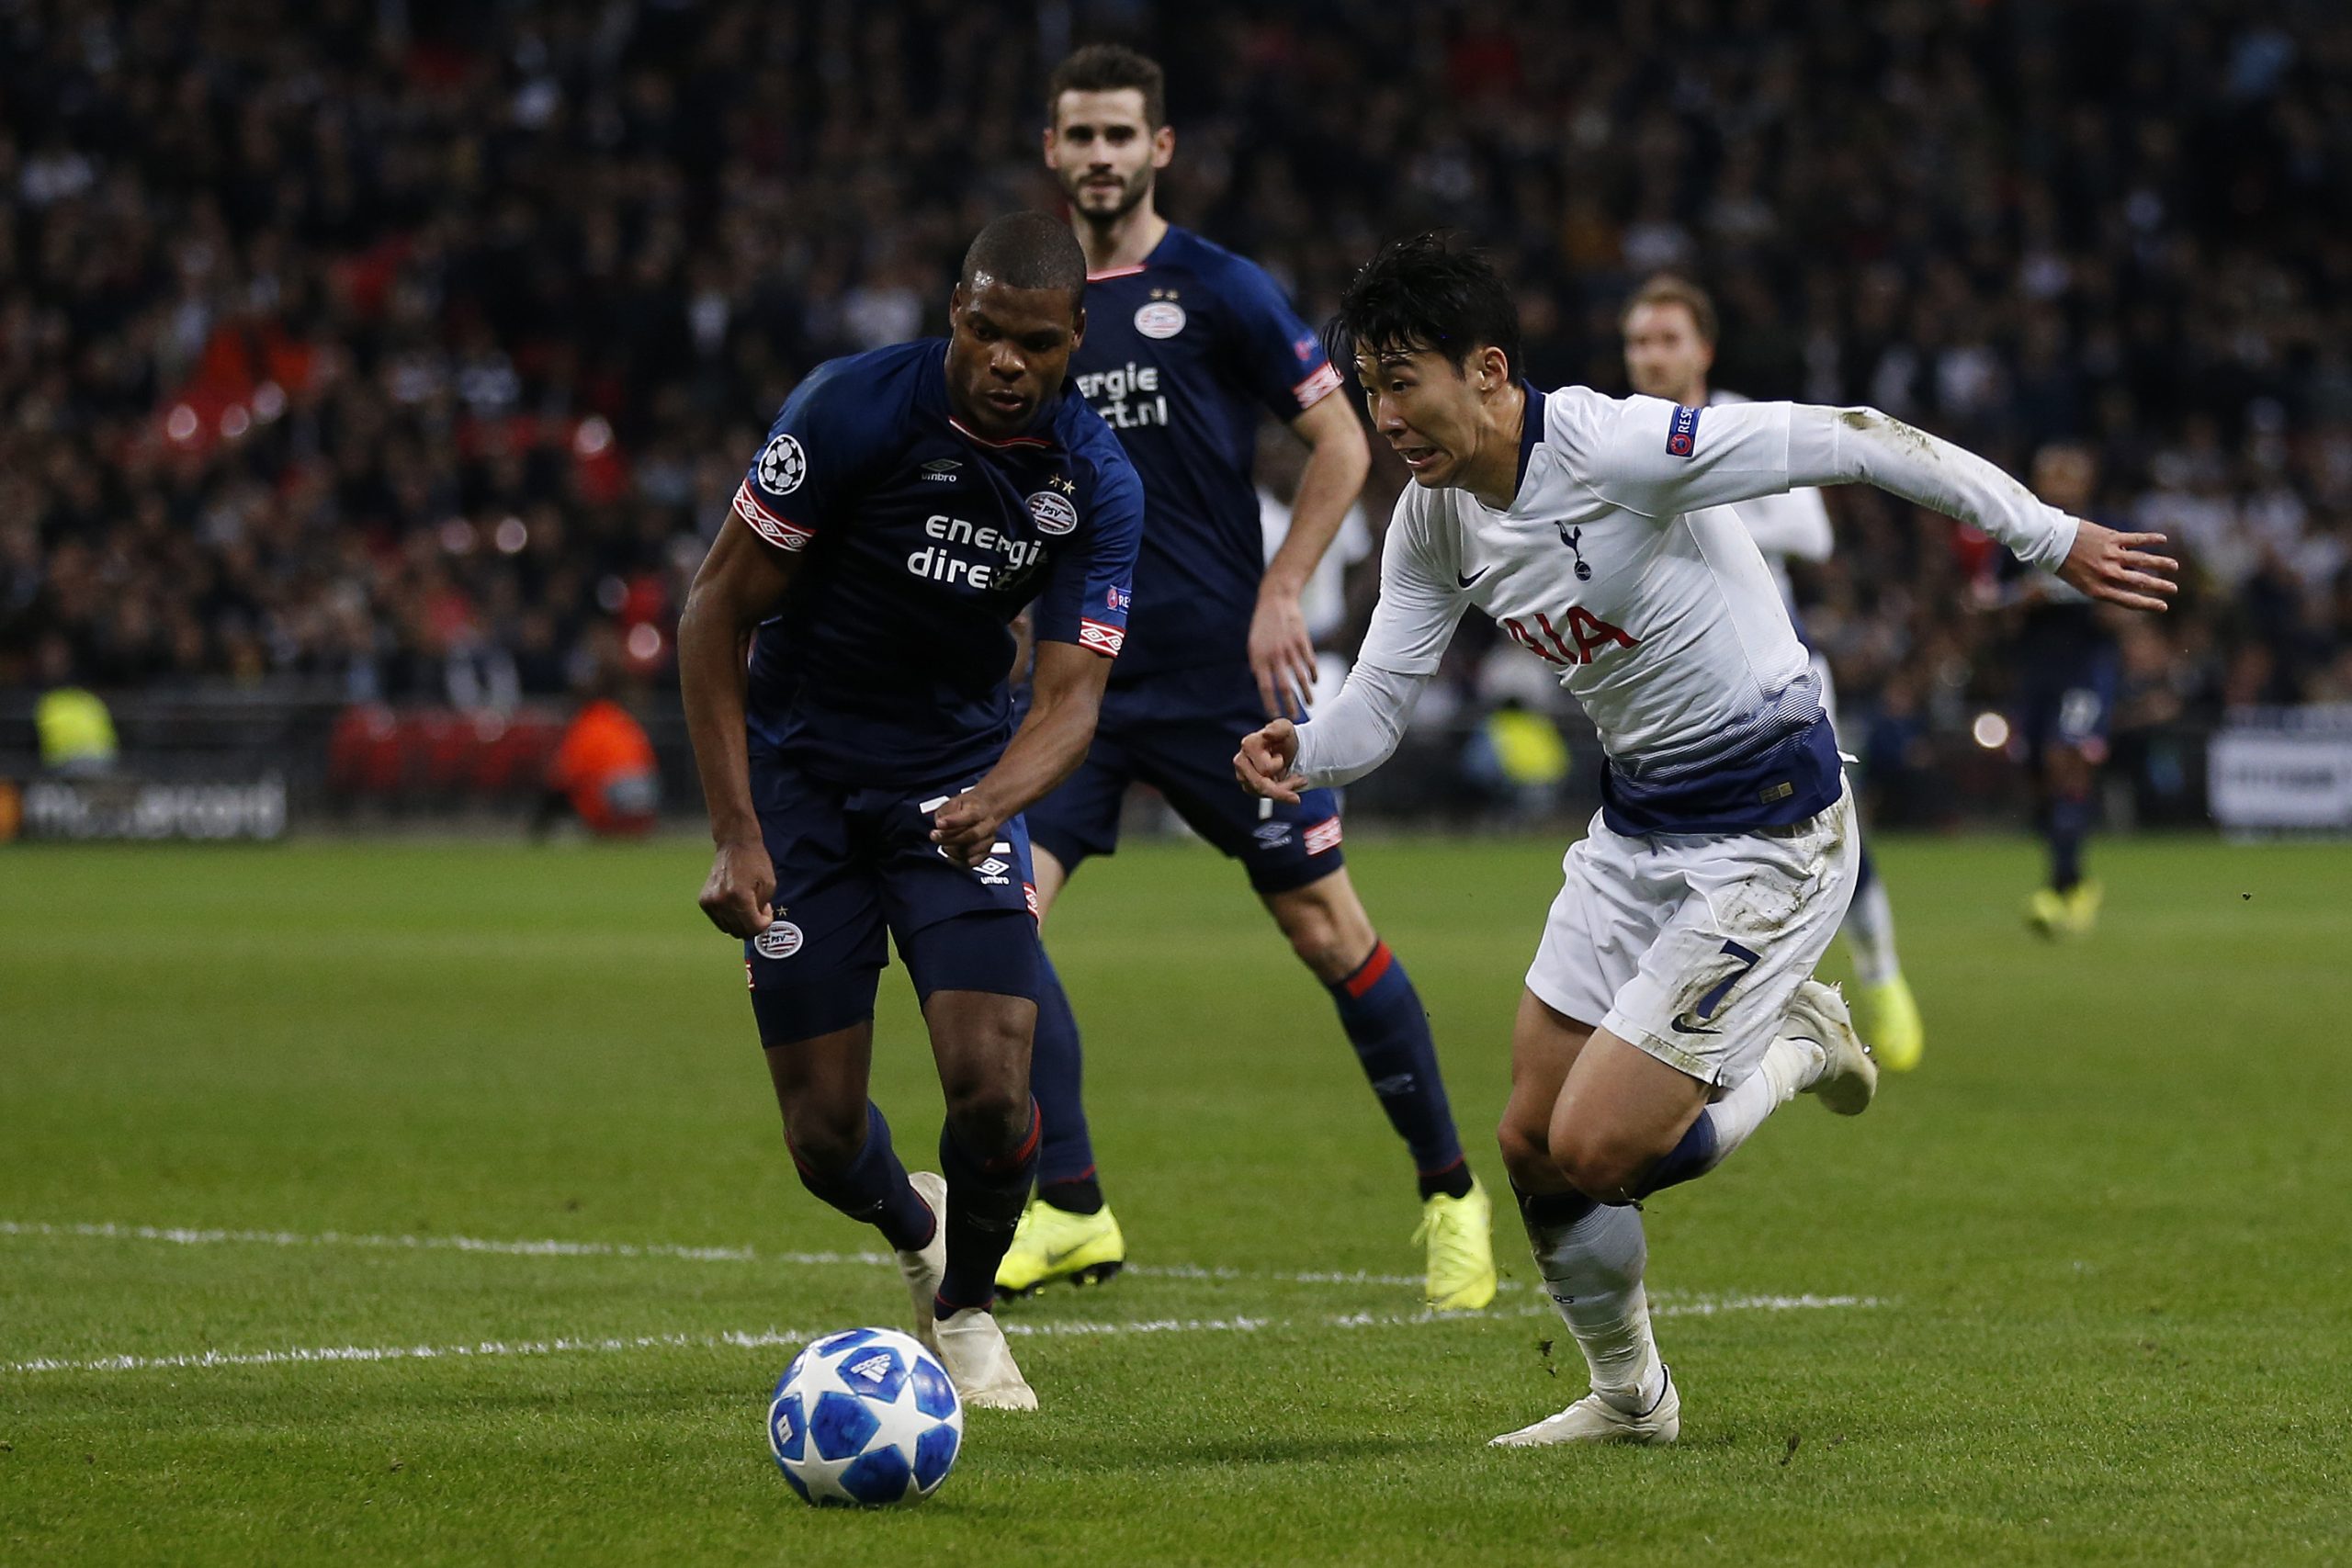 PSV Eindhoven's Dutch defender Denzel Dumfries (L) vies with Tottenham Hotspur's South Korean striker Son Heung-Min during the UEFA Champions League group B football match between Tottenham Hotspur and PSV Eindhoven at Wembley Stadium in London, on November 6, 2018. (Photo by Ian KINGTON / IKIMAGES / AFP) (Photo credit should read IAN KINGTON/AFP via Getty Images)